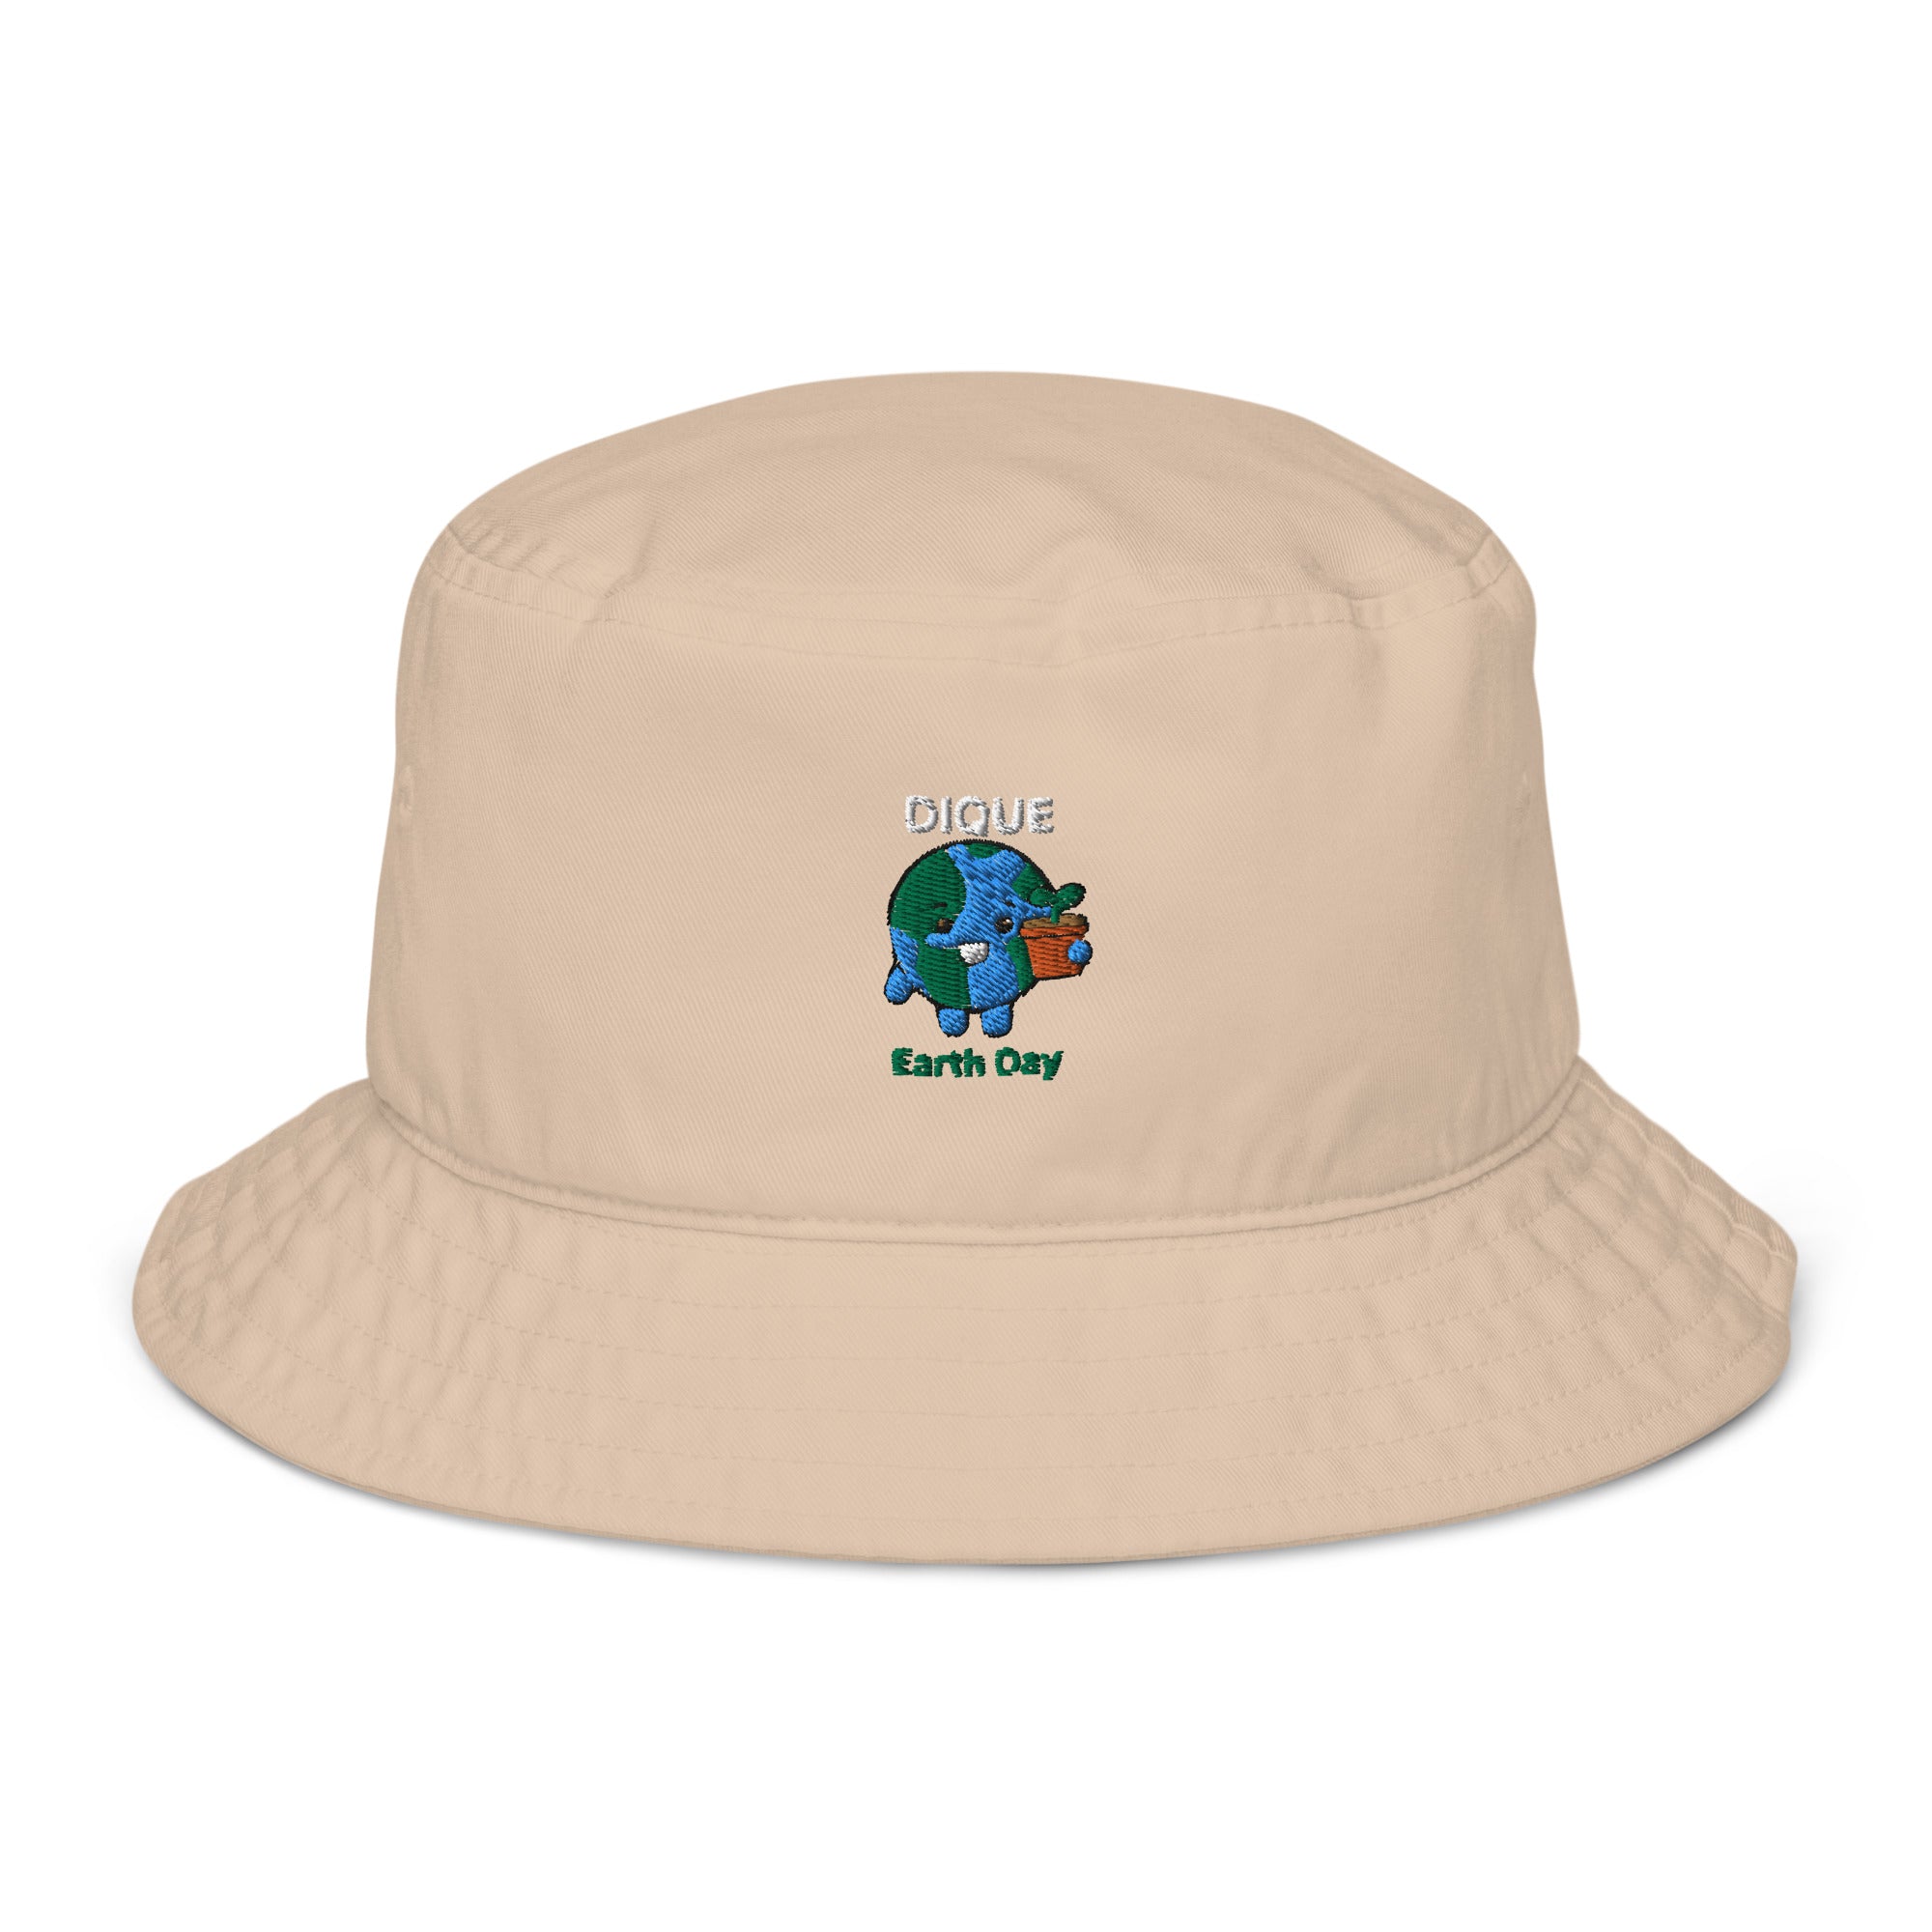 Dique Earth Day Organic Bucket Hat